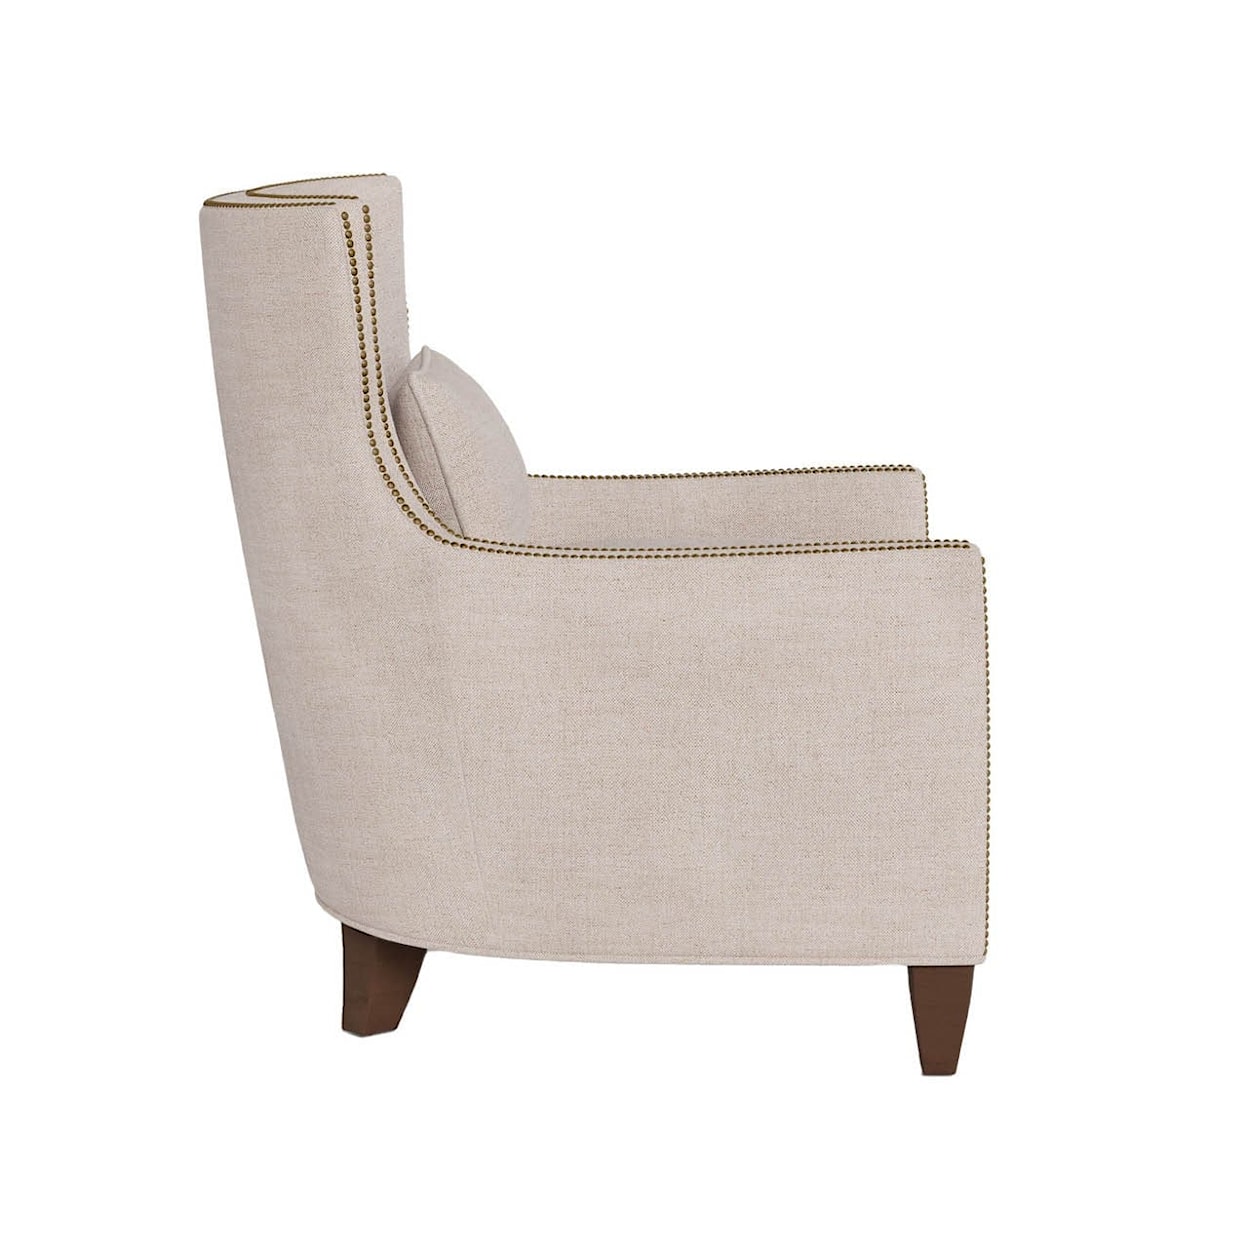 Universal Special Order Barrister Accent Chair